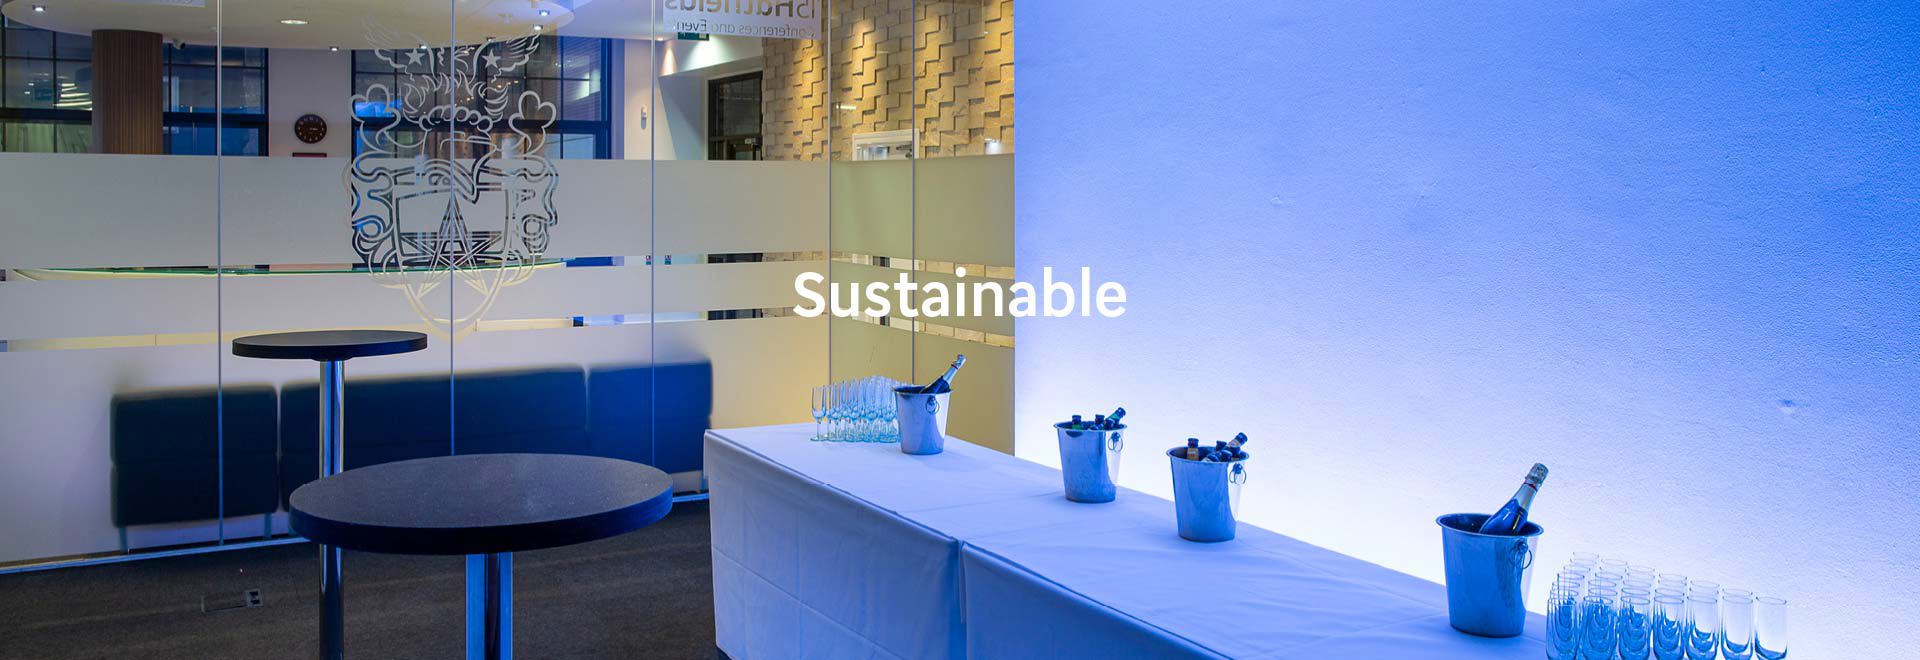 15Hatfields conference room with the word 'Sustainable'